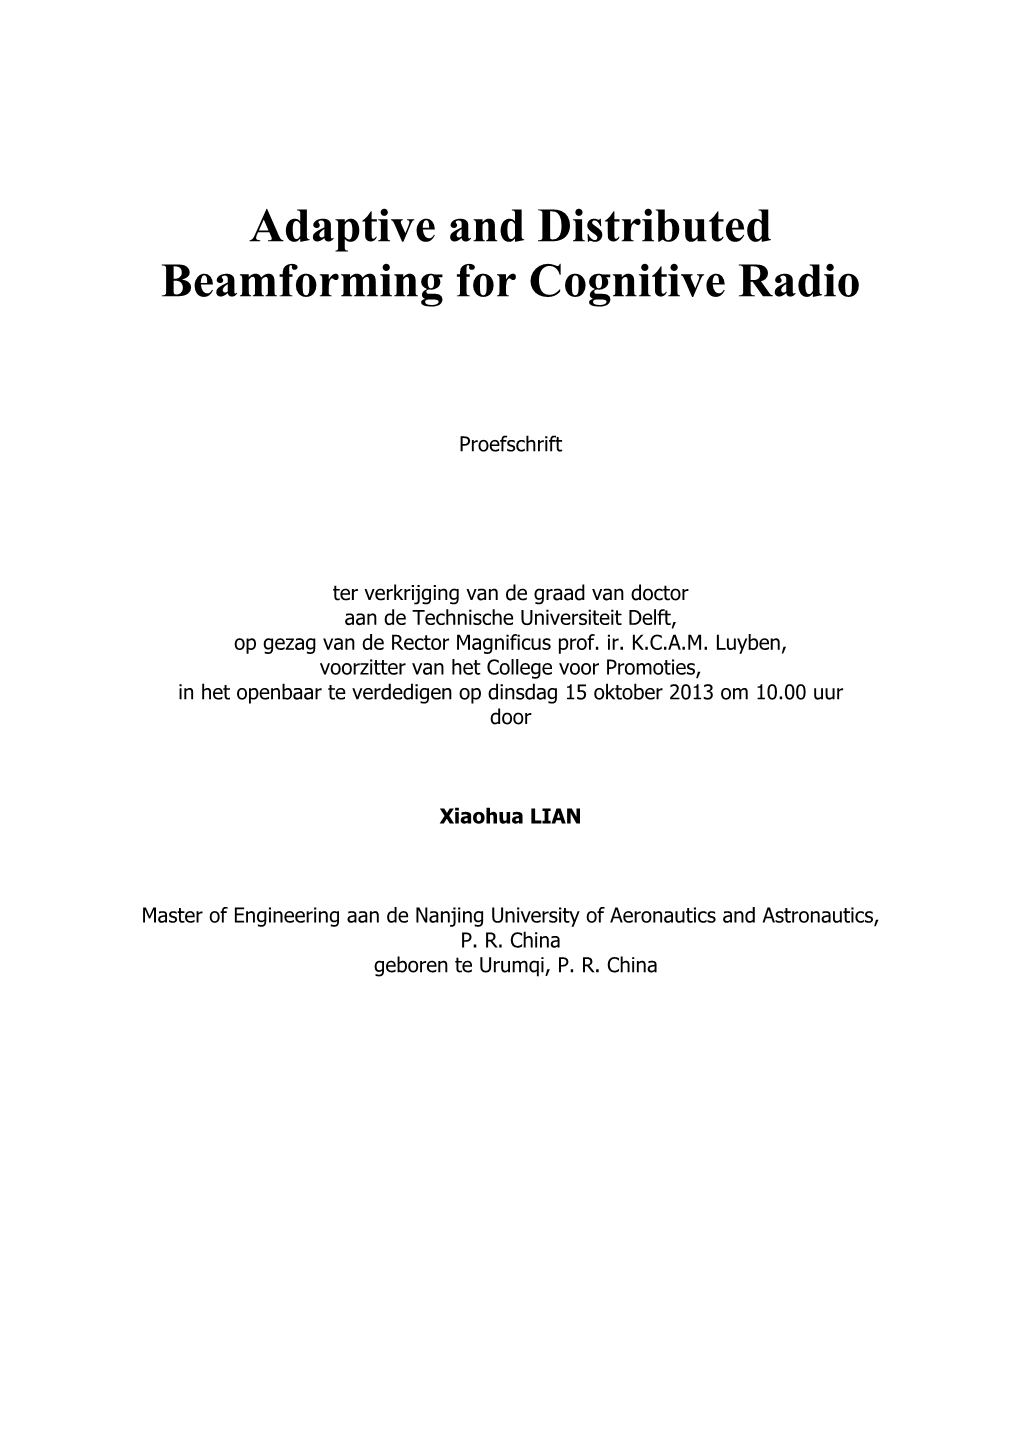 Adaptive and Distributed Beamforming for Cognitive Radio